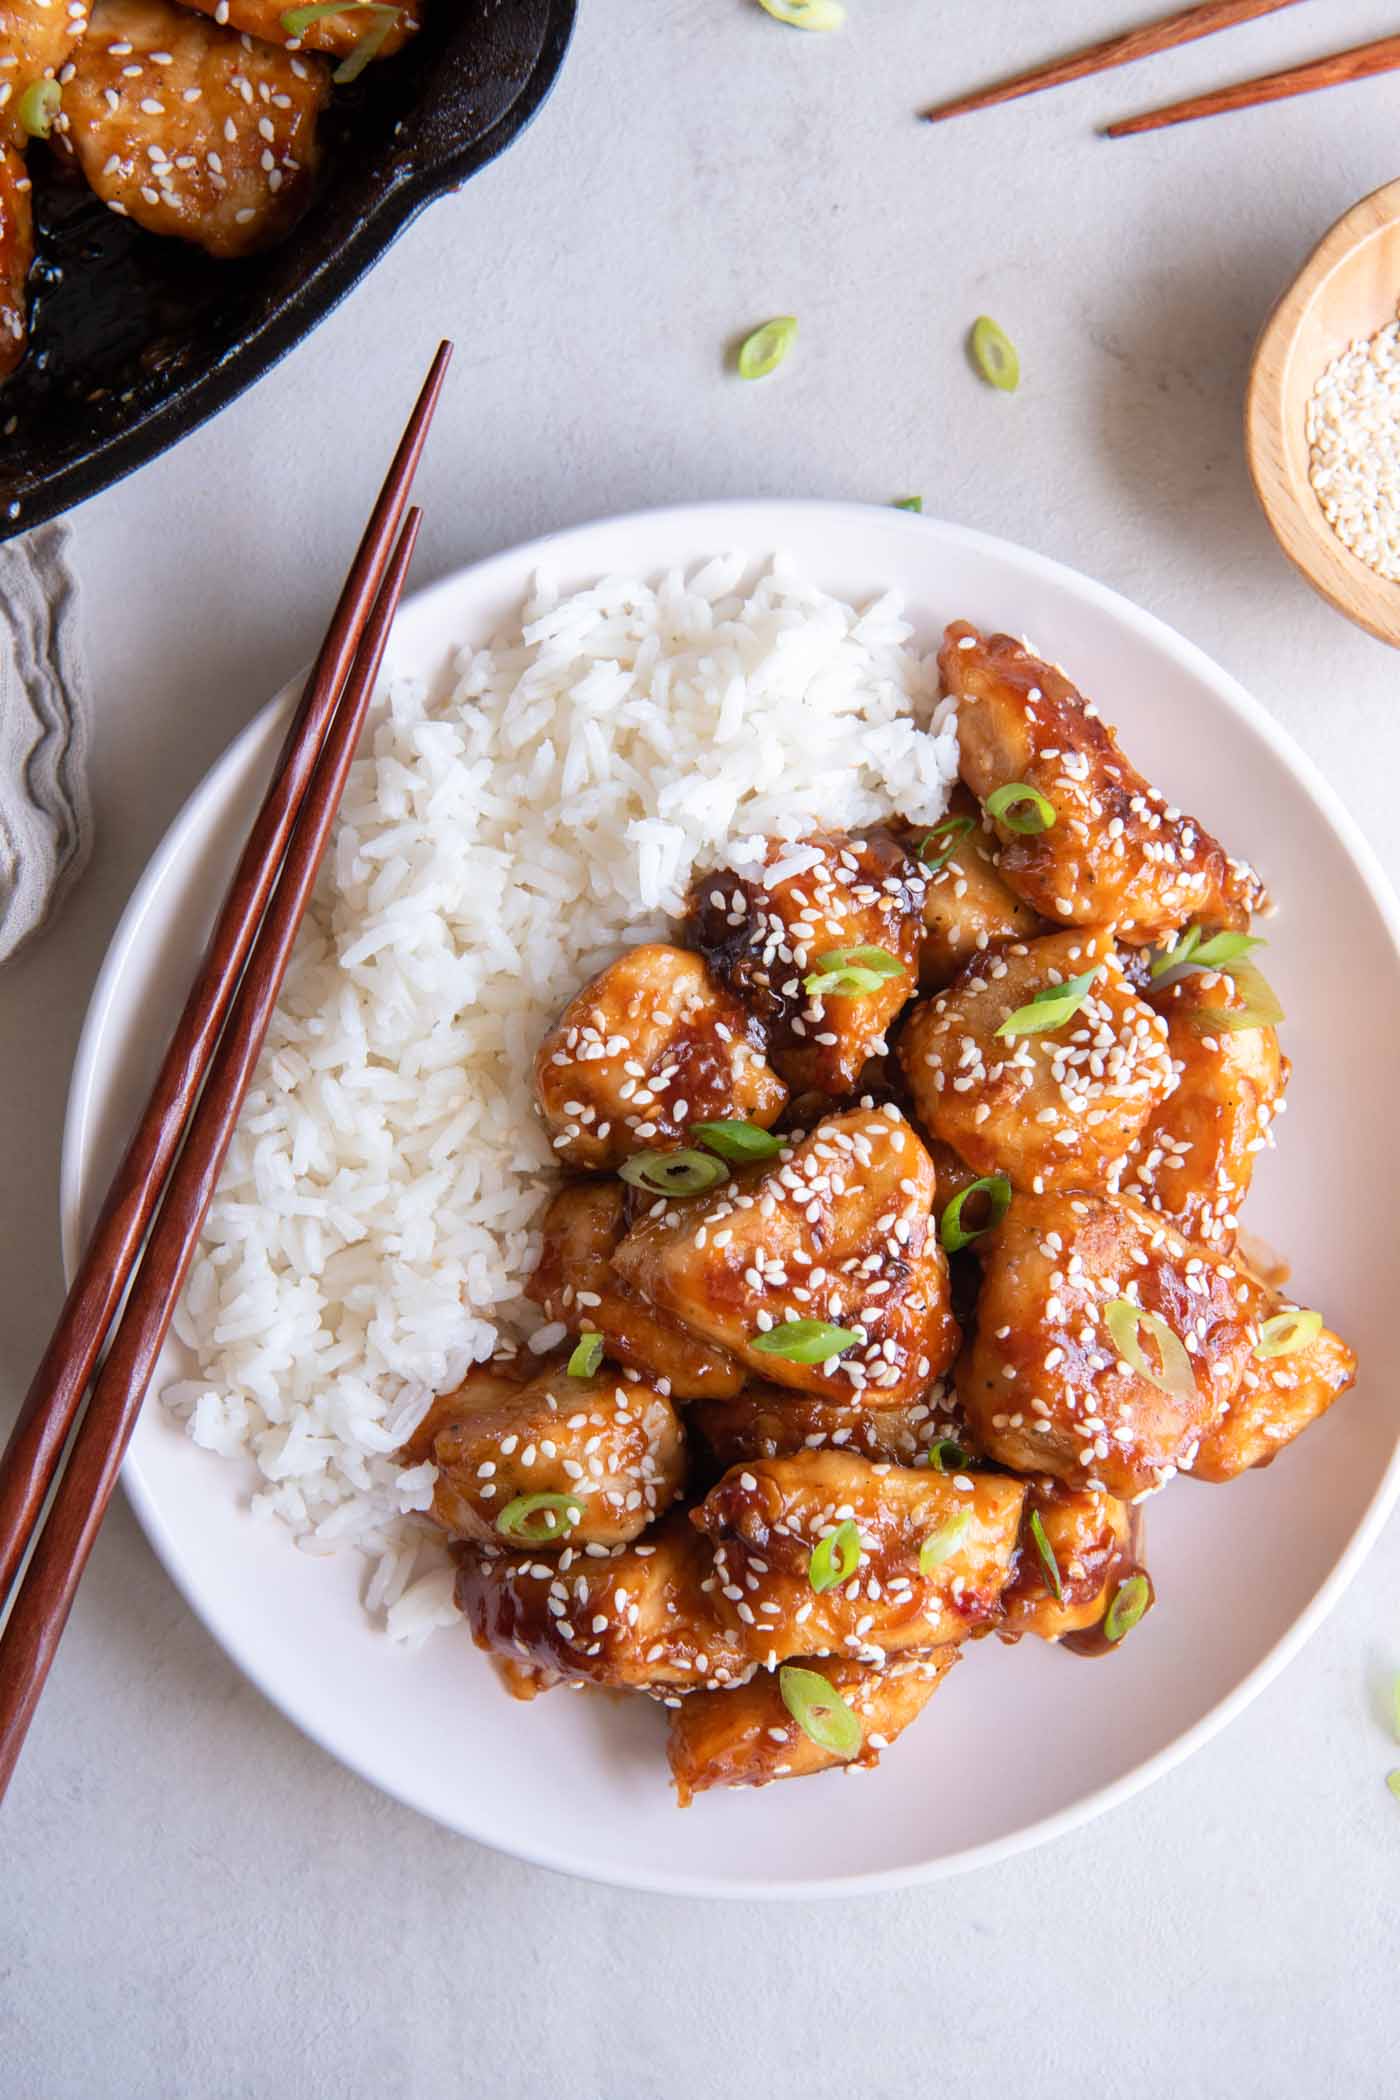 Sesame chicken served on a plate with white rice on the side.